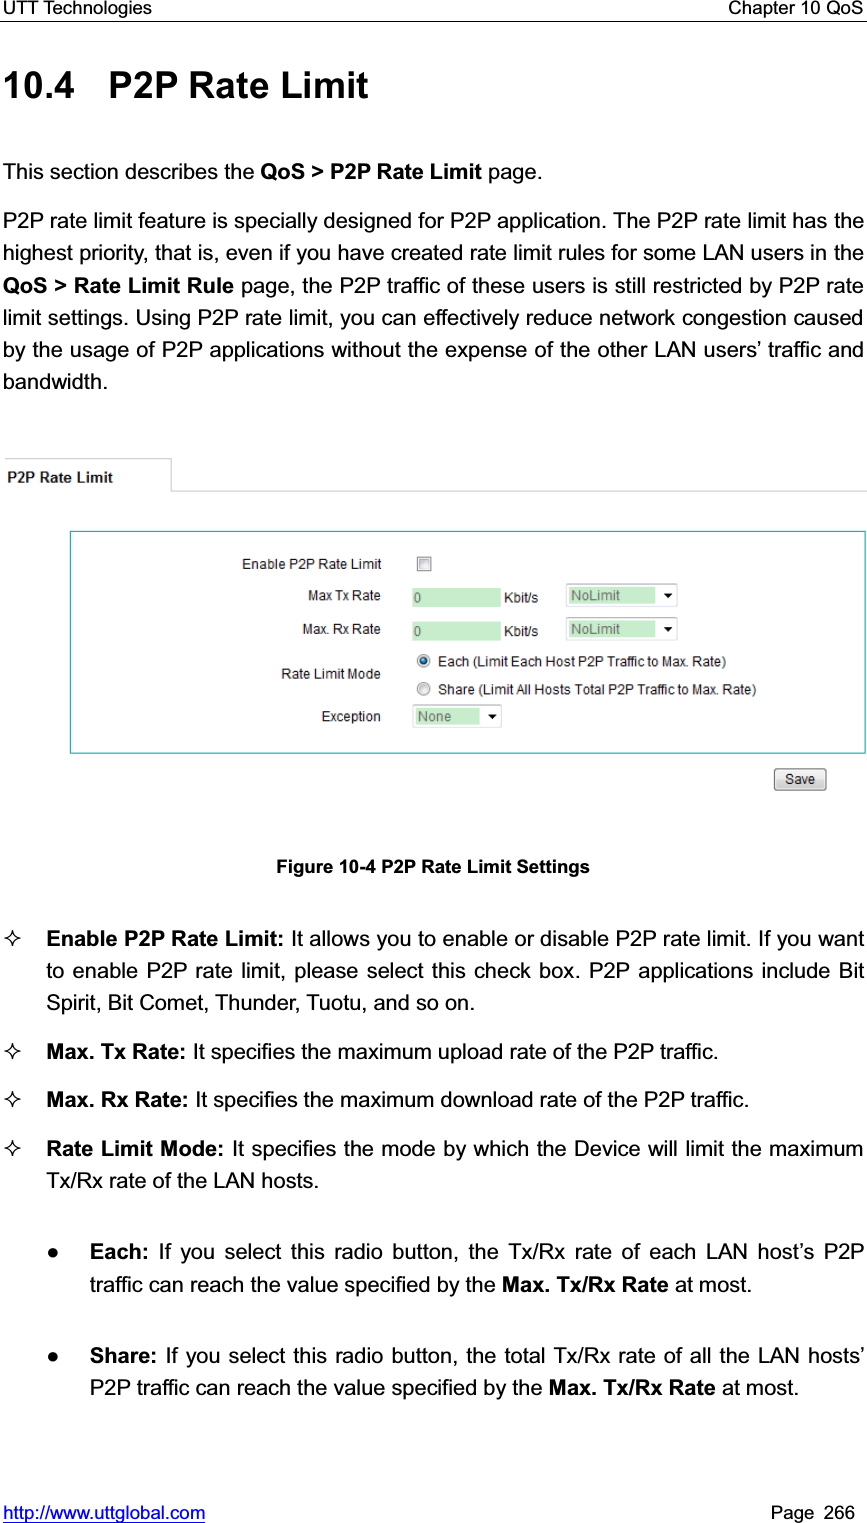 UTT Technologies    Chapter 10 QoS   http://www.uttglobal.com Page 266 10.4 P2P Rate Limit This section describes the QoS &gt; P2P Rate Limit page. P2P rate limit feature is specially designed for P2P application. The P2P rate limit has the highest priority, that is, even if you have created rate limit rules for some LAN users in theQoS &gt; Rate Limit Rule page, the P2P traffic of these users is still restricted by P2P rate limit settings. Using P2P rate limit, you can effectively reduce network congestion caused by the usage of P2P applications without the expense of the other LAN users¶ traffic and bandwidth. Figure 10-4 P2P Rate Limit Settings Enable P2P Rate Limit: It allows you to enable or disable P2P rate limit. If you want to enable P2P rate limit, please select this check box. P2P applications include Bit Spirit, Bit Comet, Thunder, Tuotu, and so on. Max. Tx Rate: It specifies the maximum upload rate of the P2P traffic.Max. Rx Rate: It specifies the maximum download rate of the P2P traffic. Rate Limit Mode: It specifies the mode by which the Device will limit the maximum Tx/Rx rate of the LAN hosts.   ƔEach: If you select this radio button, the Tx/Rx rate of each LAN host¶s P2P traffic can reach the value specified by the Max. Tx/Rx Rate at most.   ƔShare: If you select this radio button, the total Tx/Rx rate of all the LAN hostV¶P2P traffic can reach the value specified by the Max. Tx/Rx Rate at most. 